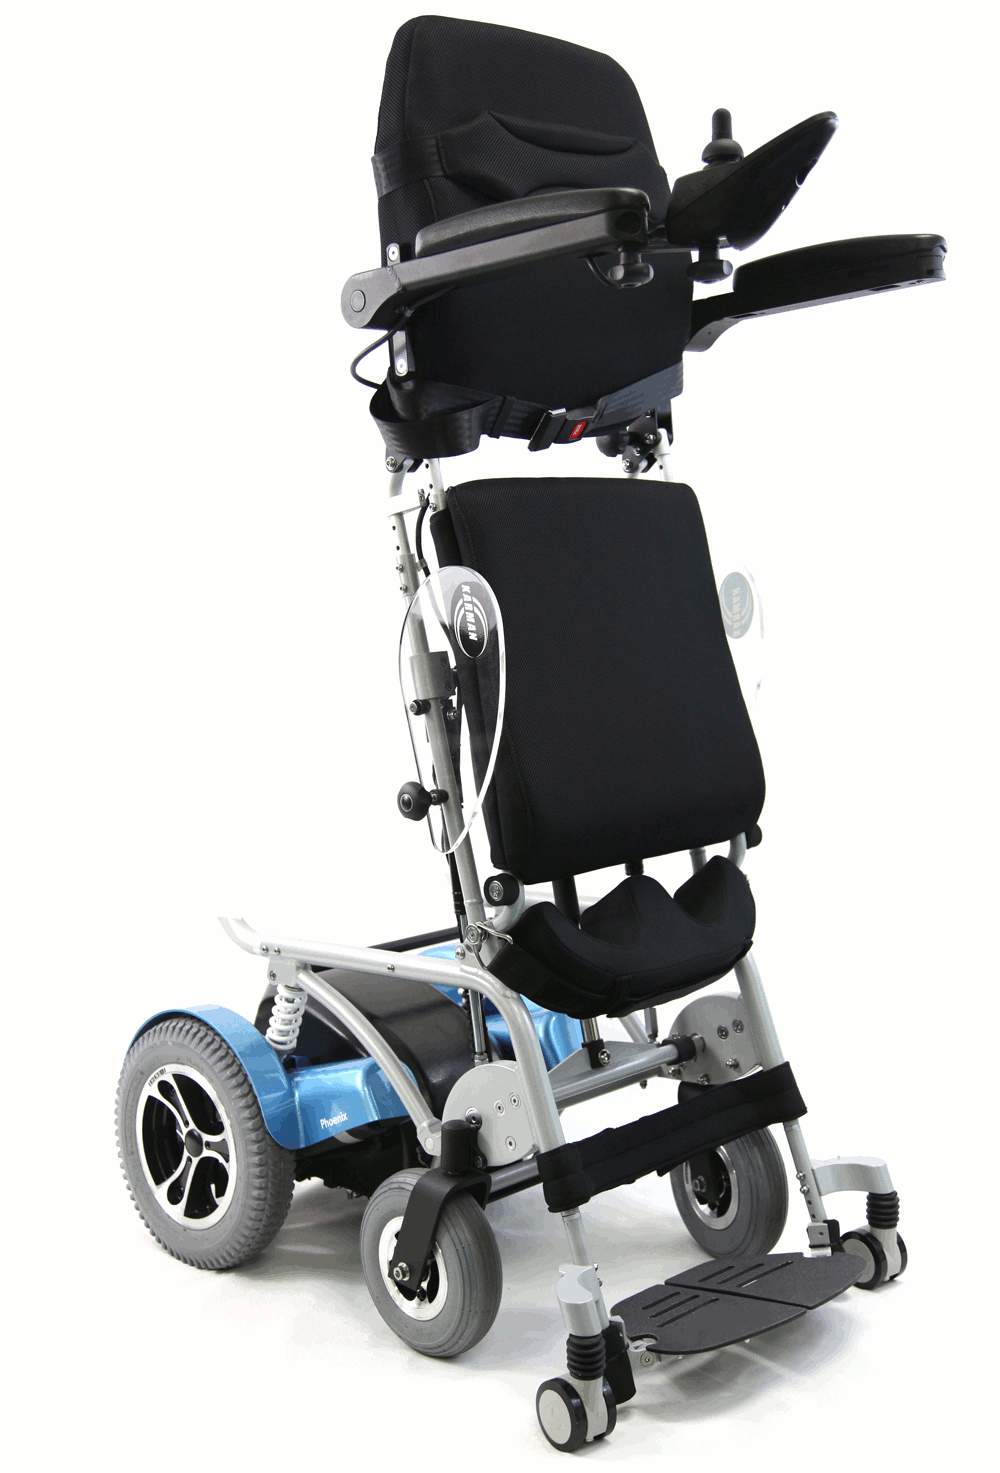 Stand Up Wheelchairs Products, Supplies and Equipment